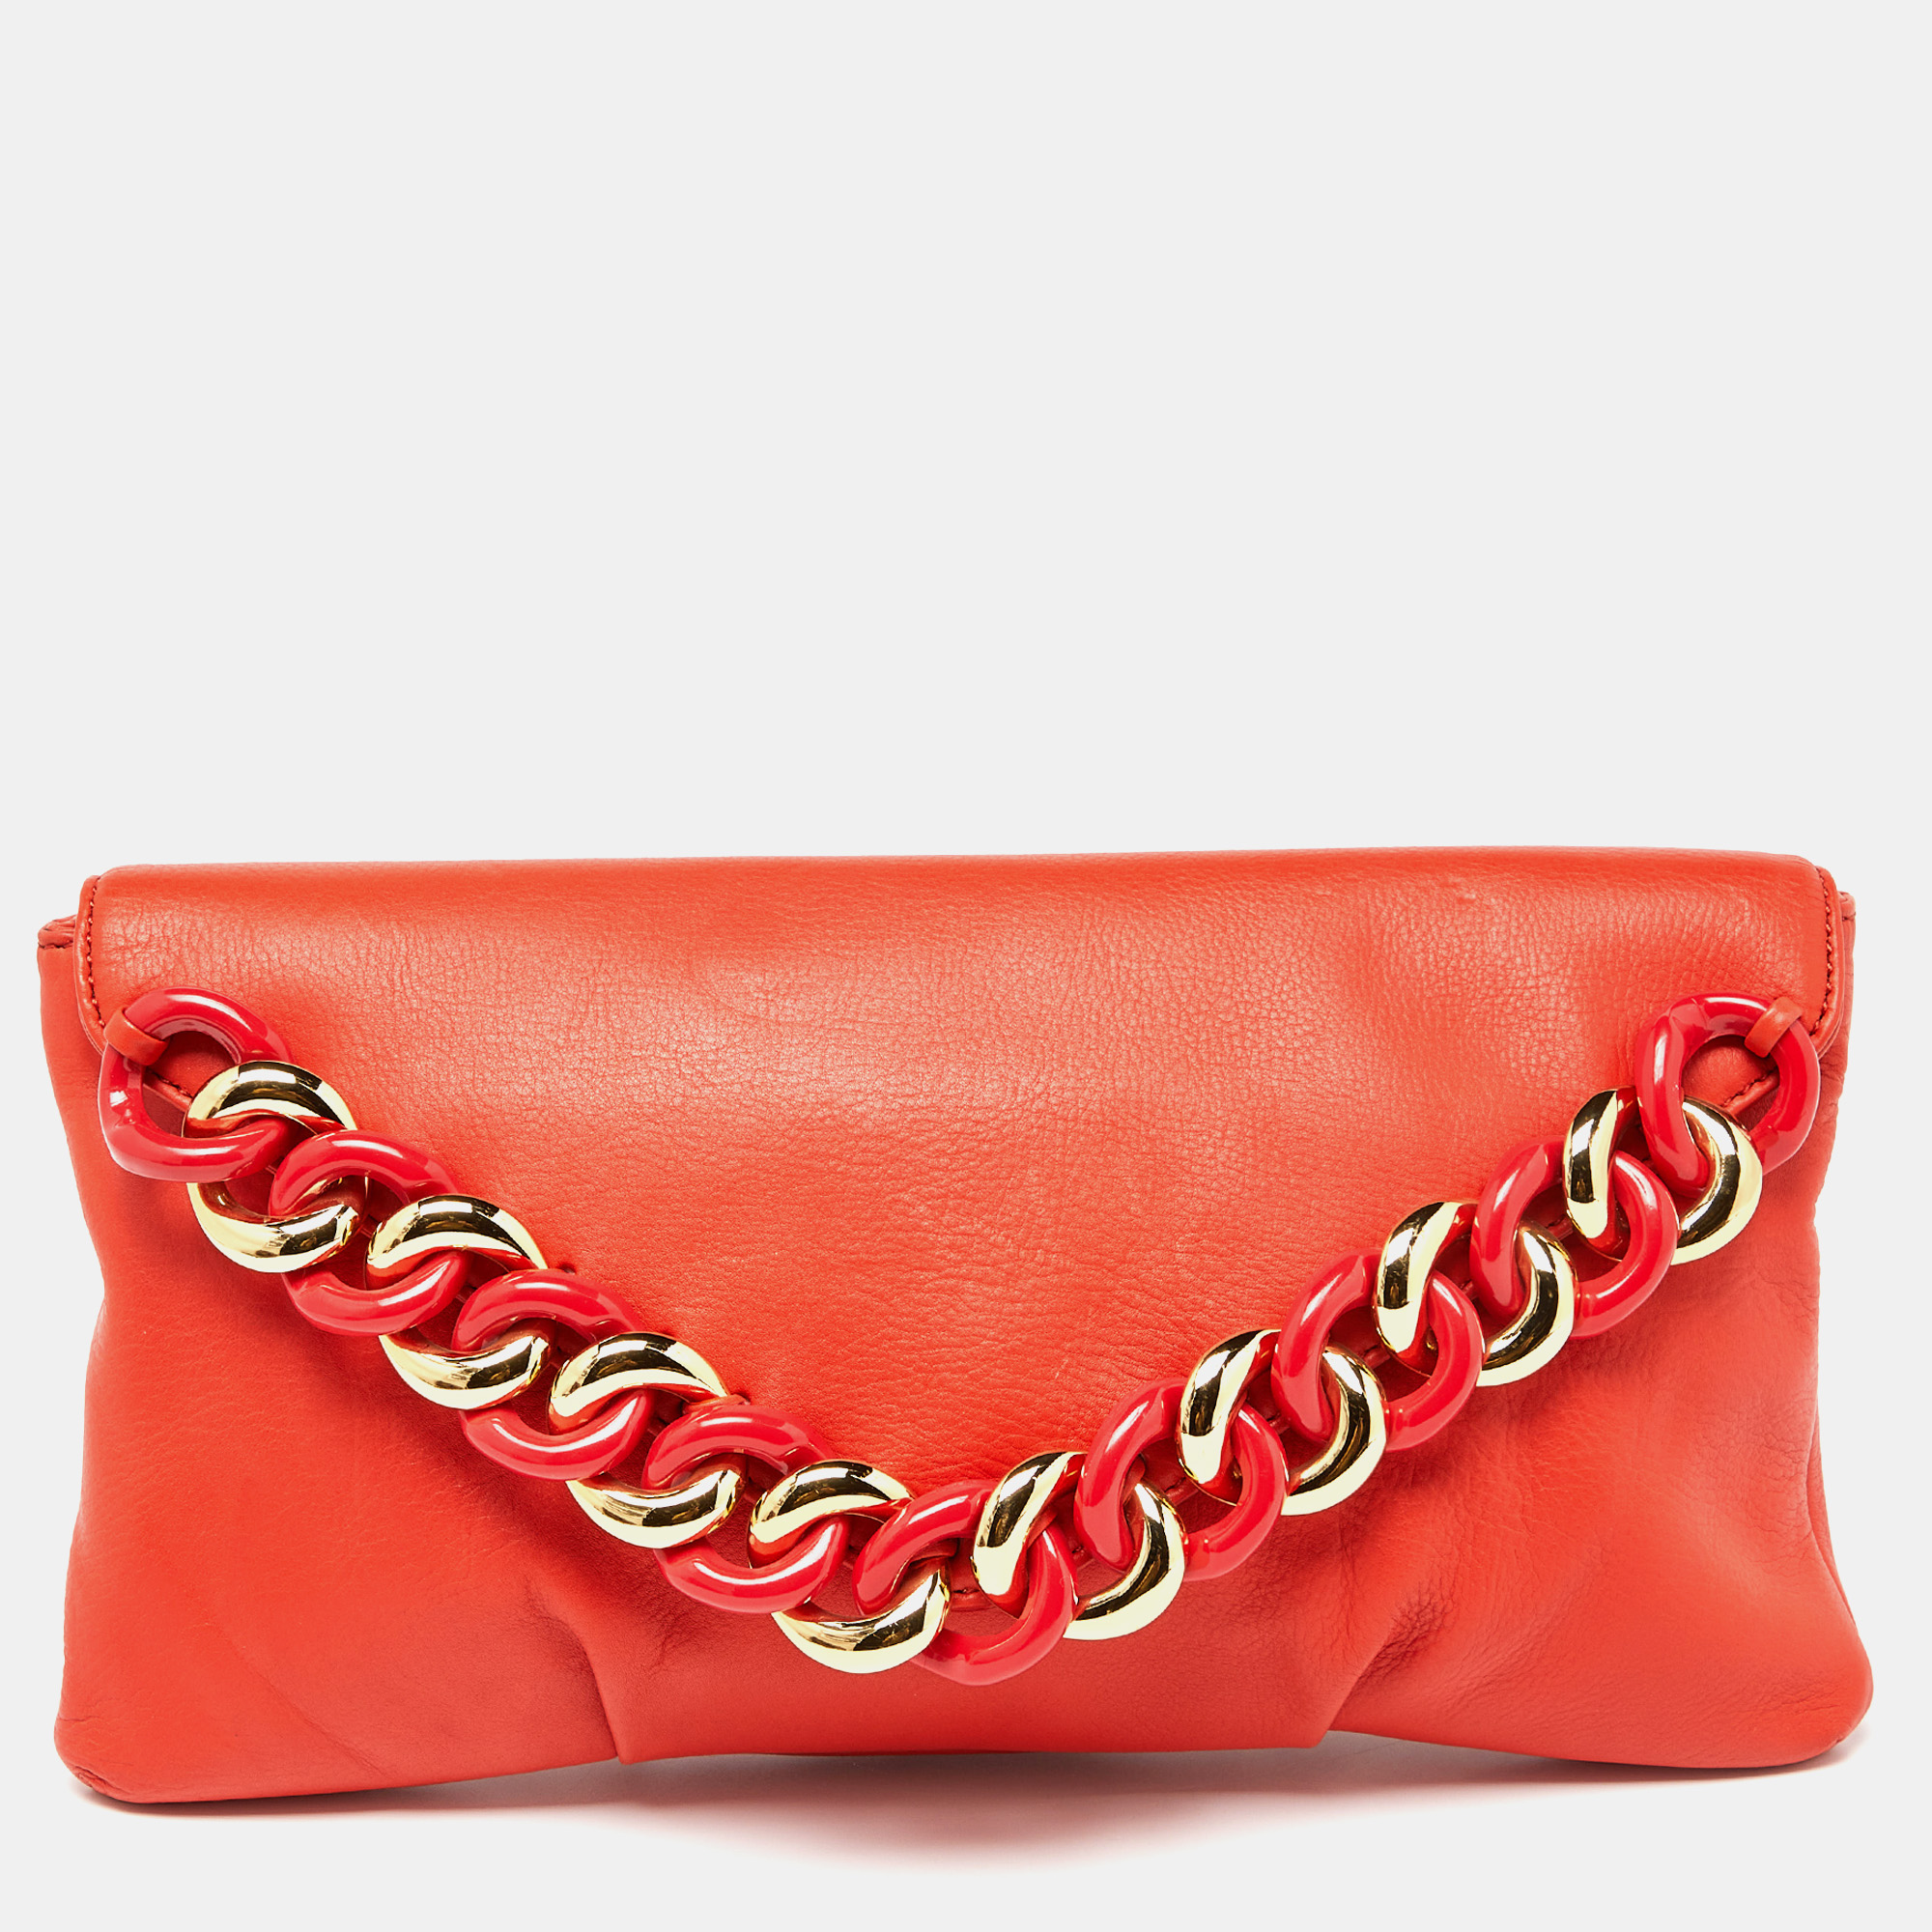 Pre-owned Michael Kors Orange Leather Chain Link Envelope Clutch